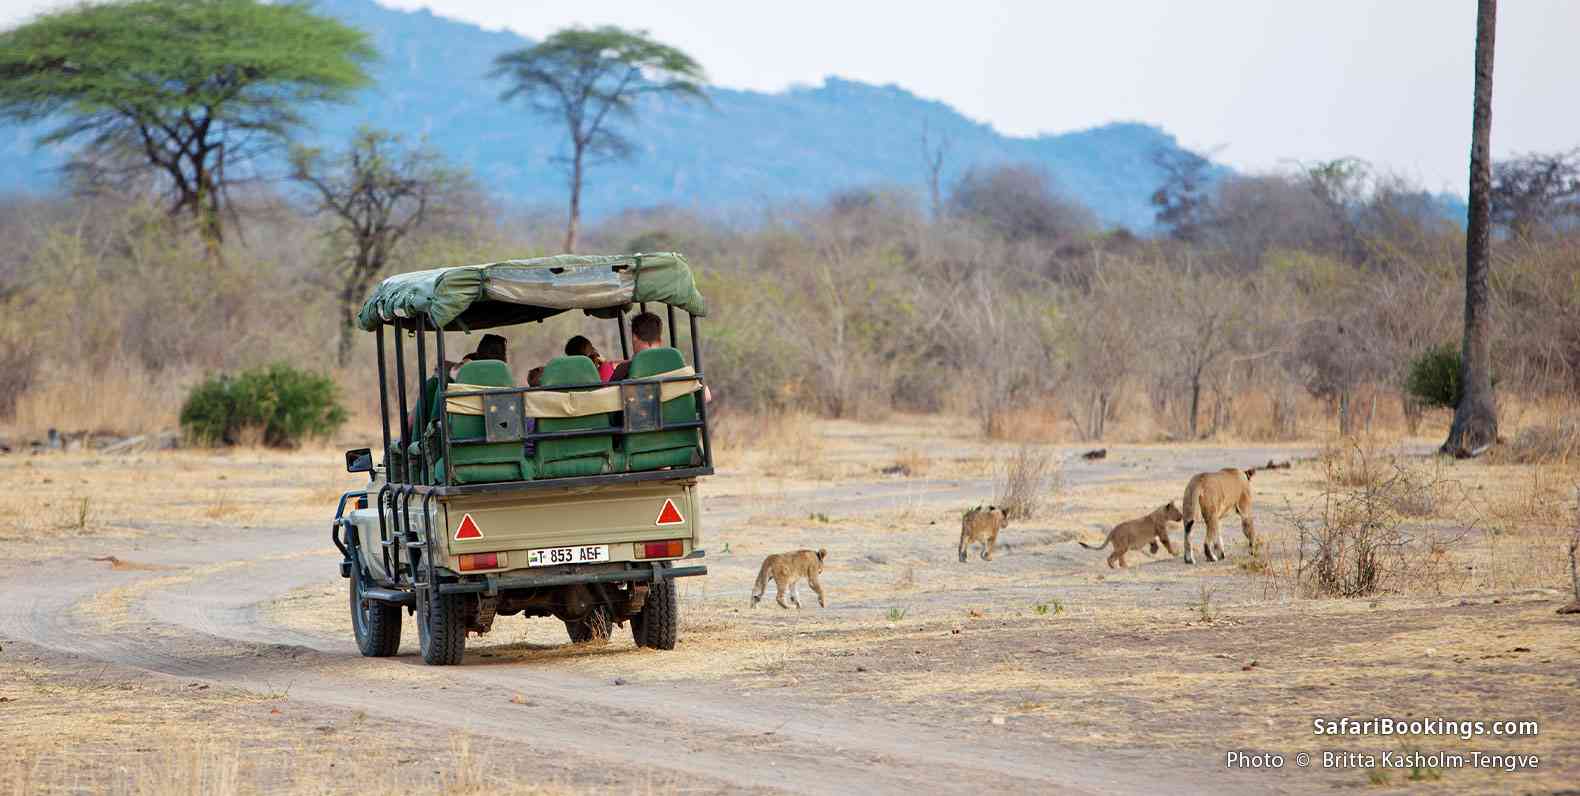 Safari vehicle with people watching lioness with cubs